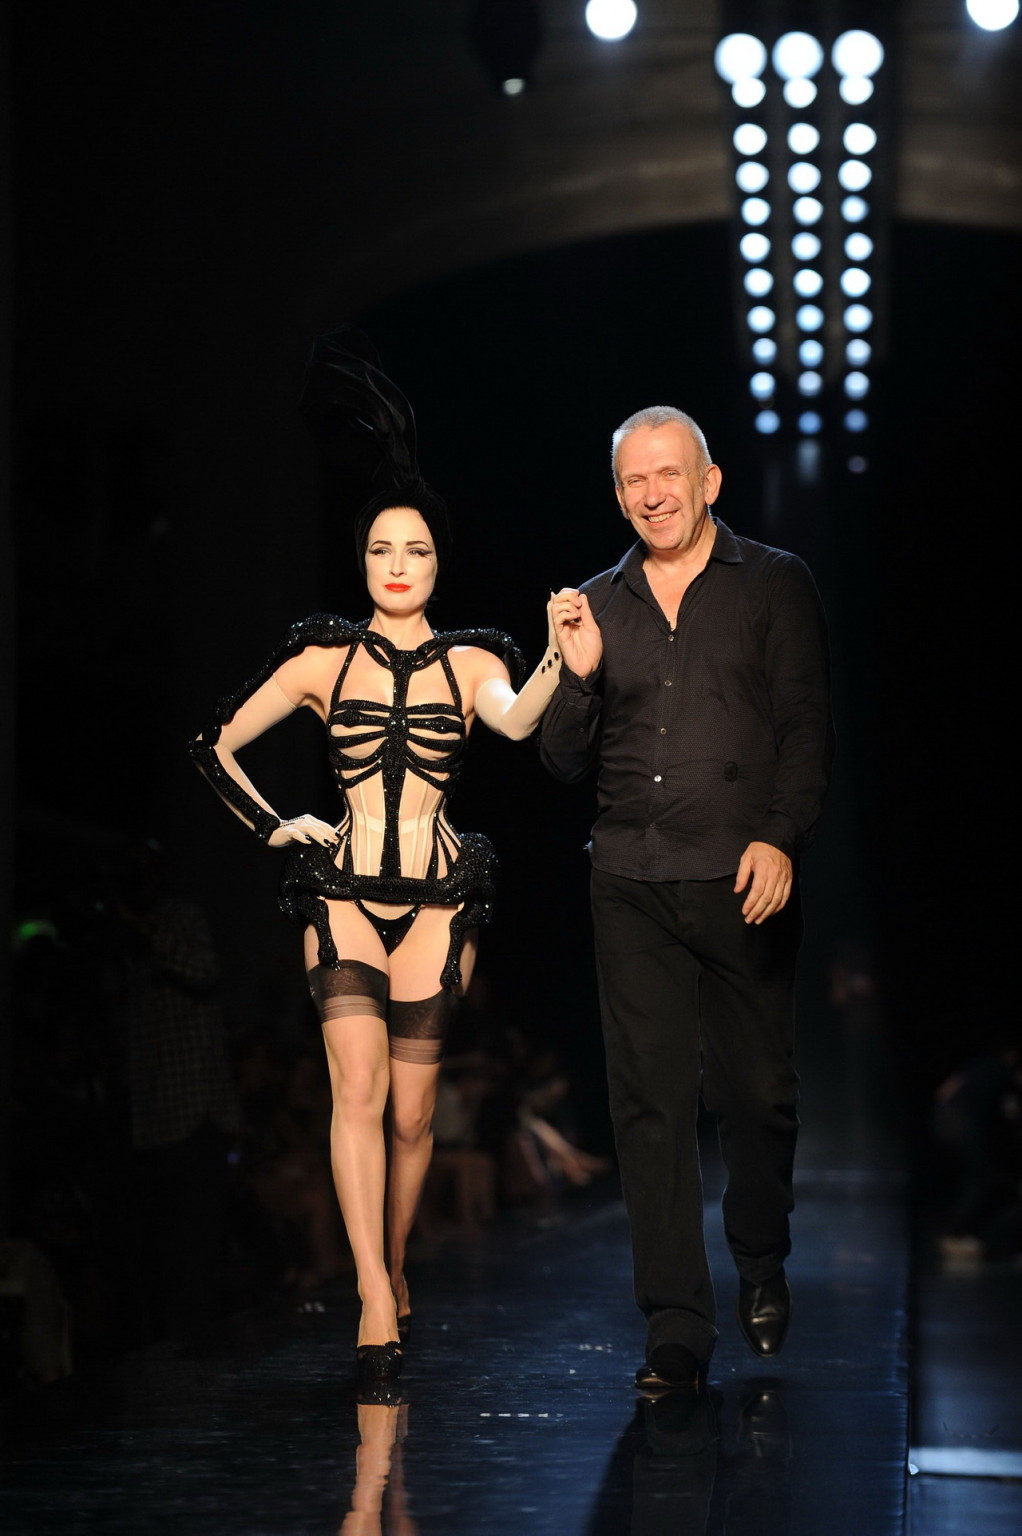 Dita Von Teese in skimpy werid outfit at Jean-Paul Gaultier show #75342327